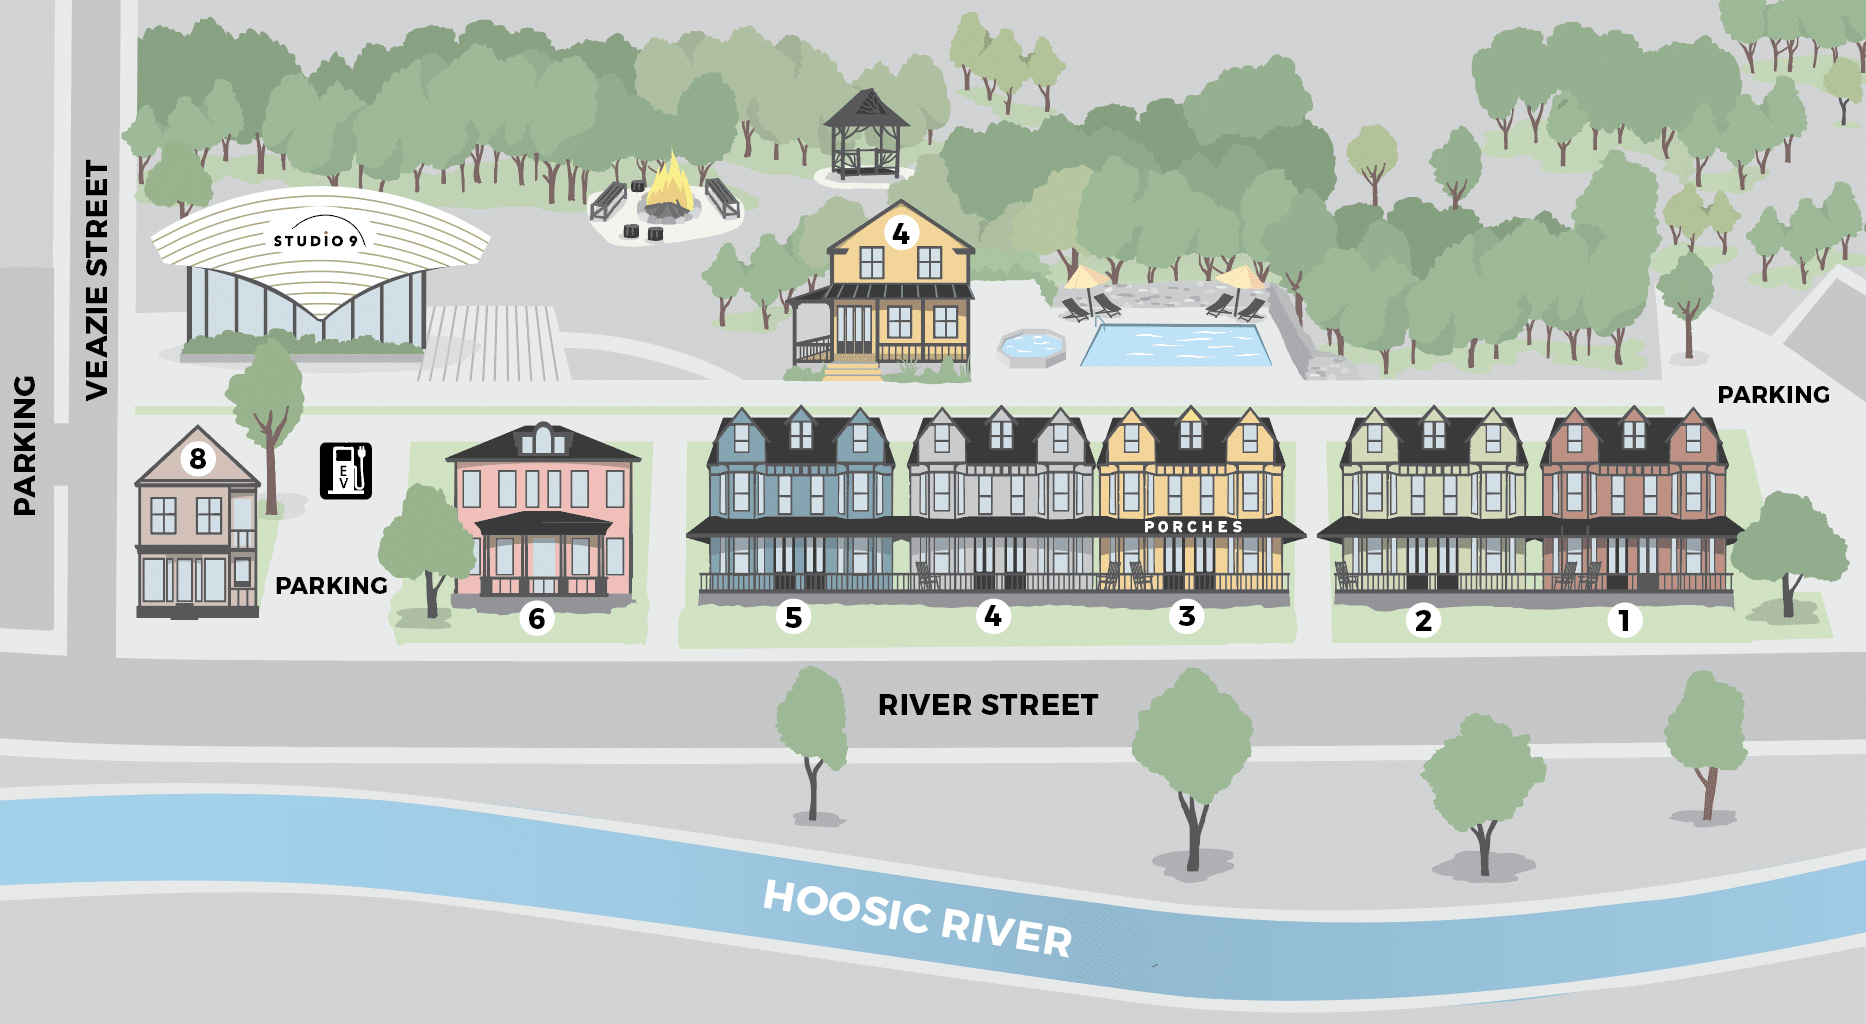 Illustration of a riverside community with diverse buildings, including hotels near North Adams Massachusetts, trees, a river labeled "Hoosic River," and designated parking areas.